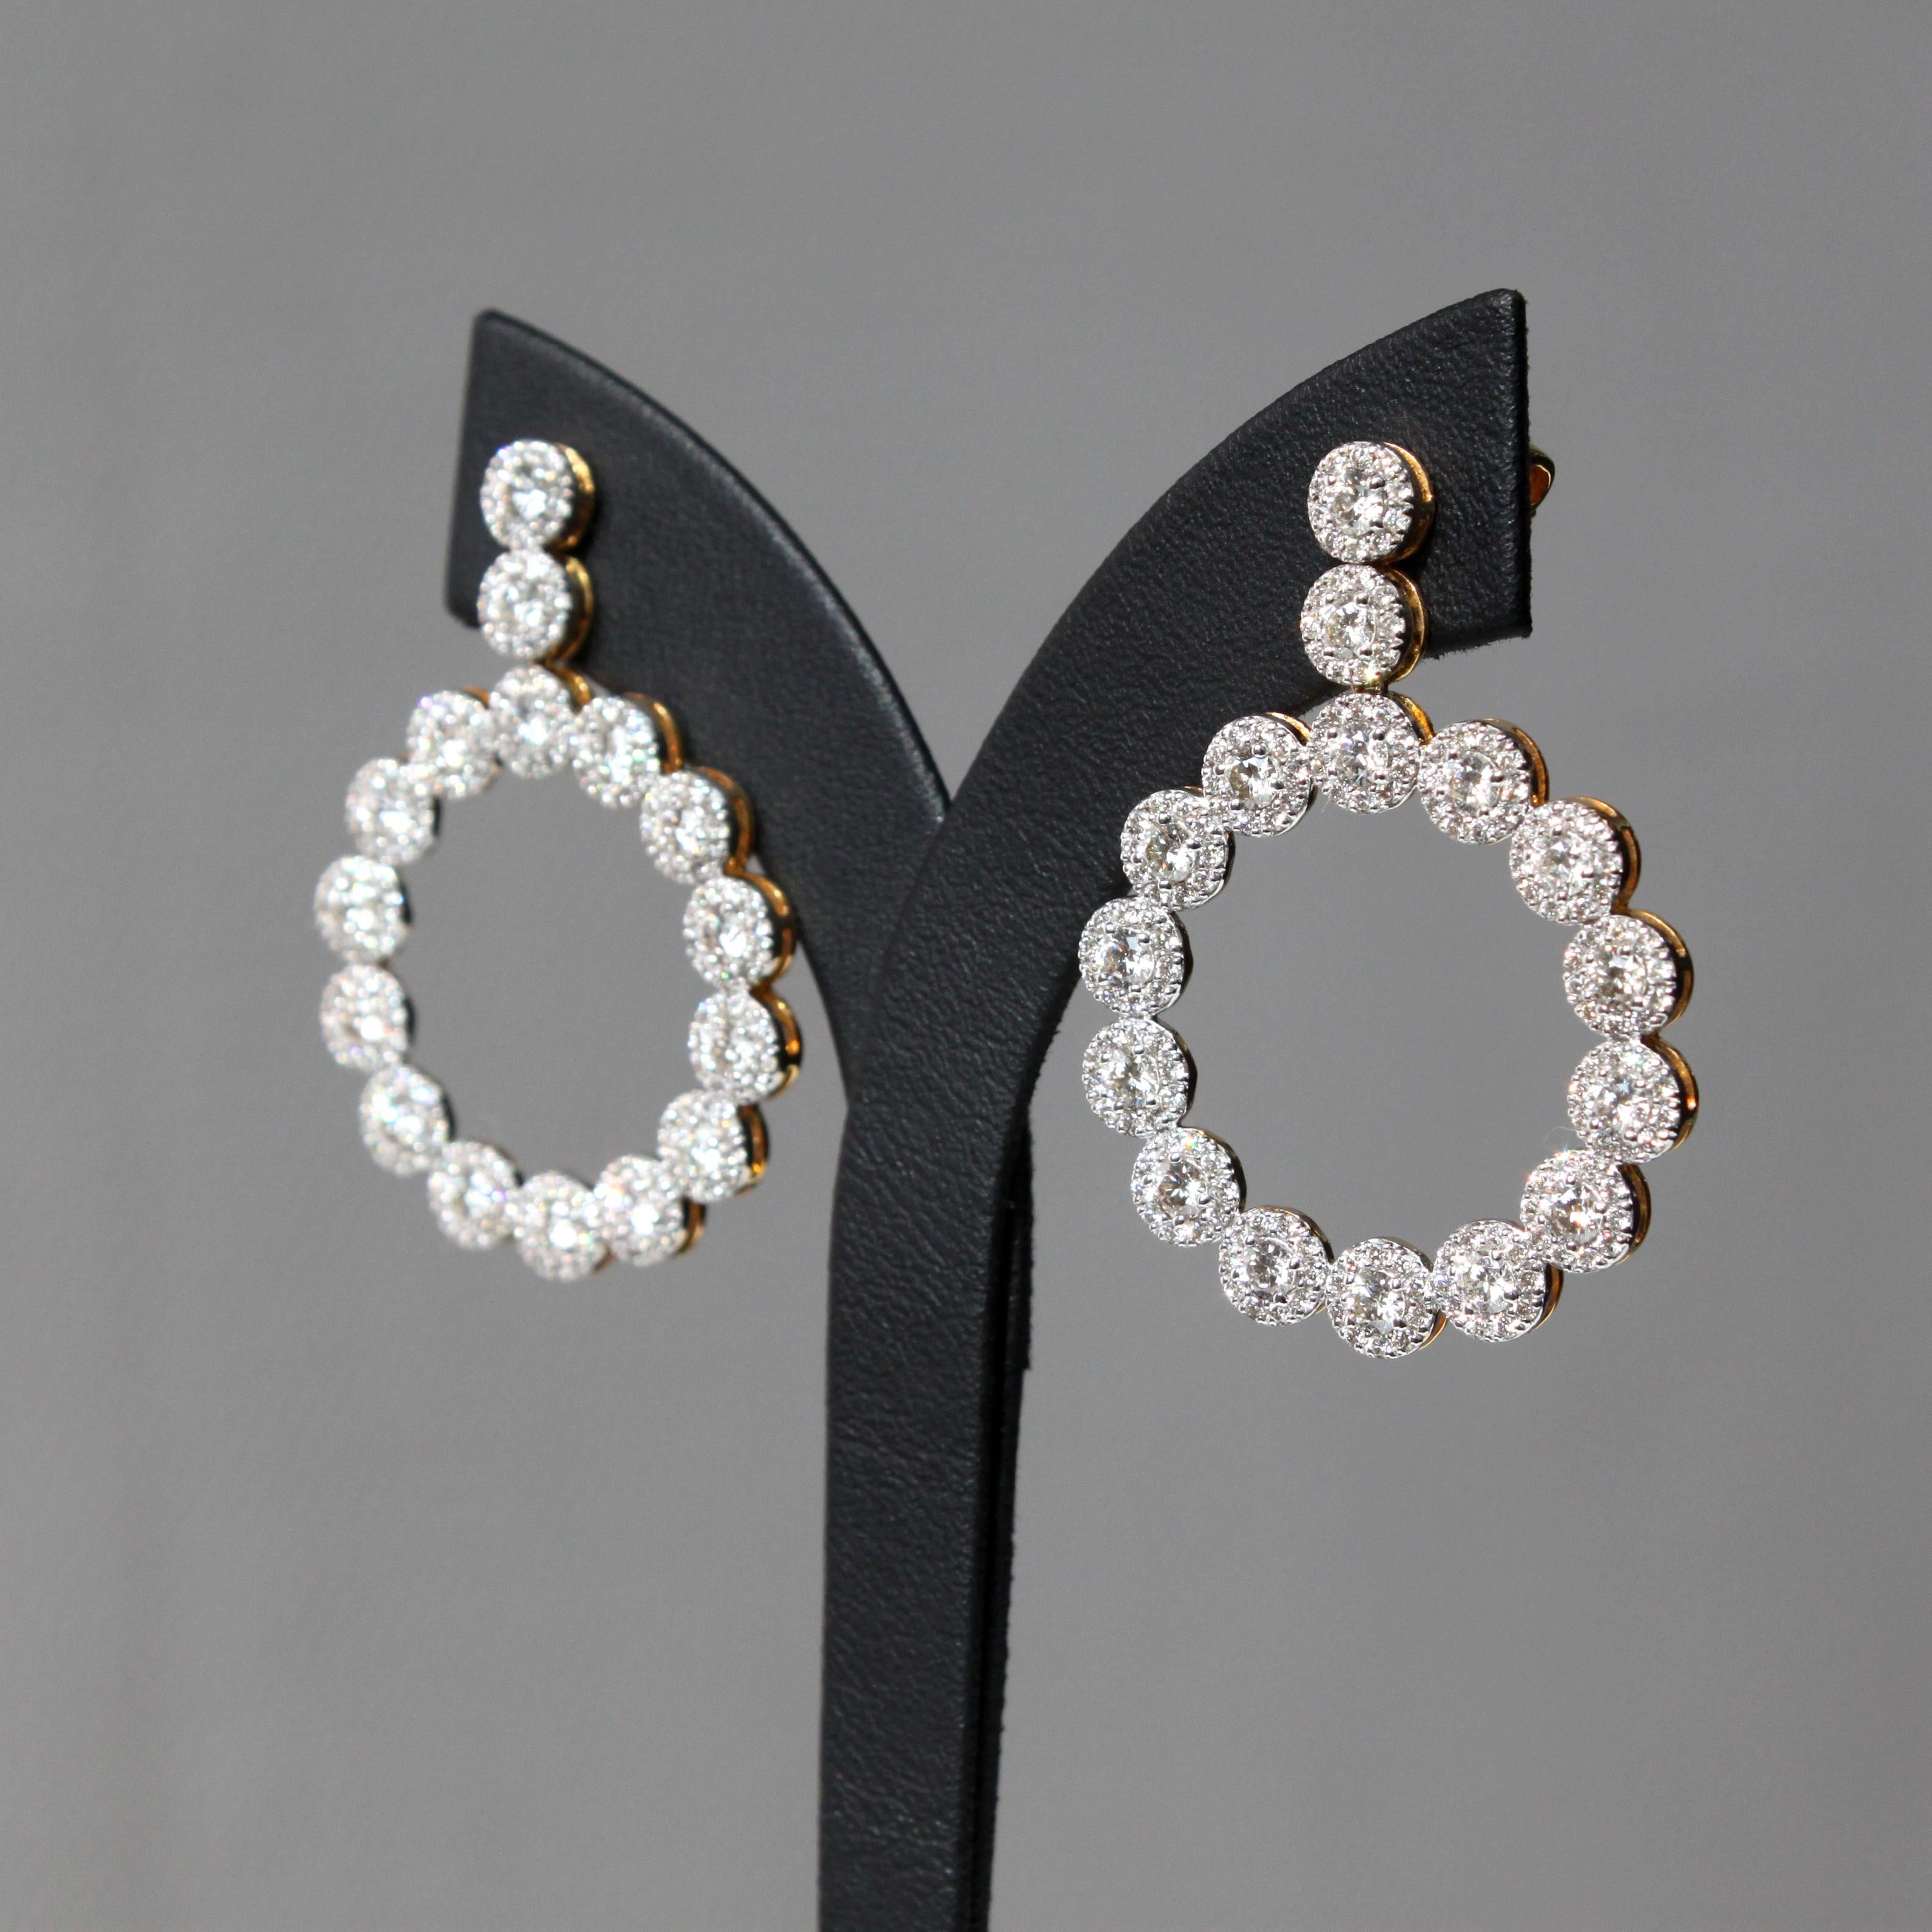 Modernist Cluster Diamond Earring in 14K gold - a dangling classic delight  For Sale